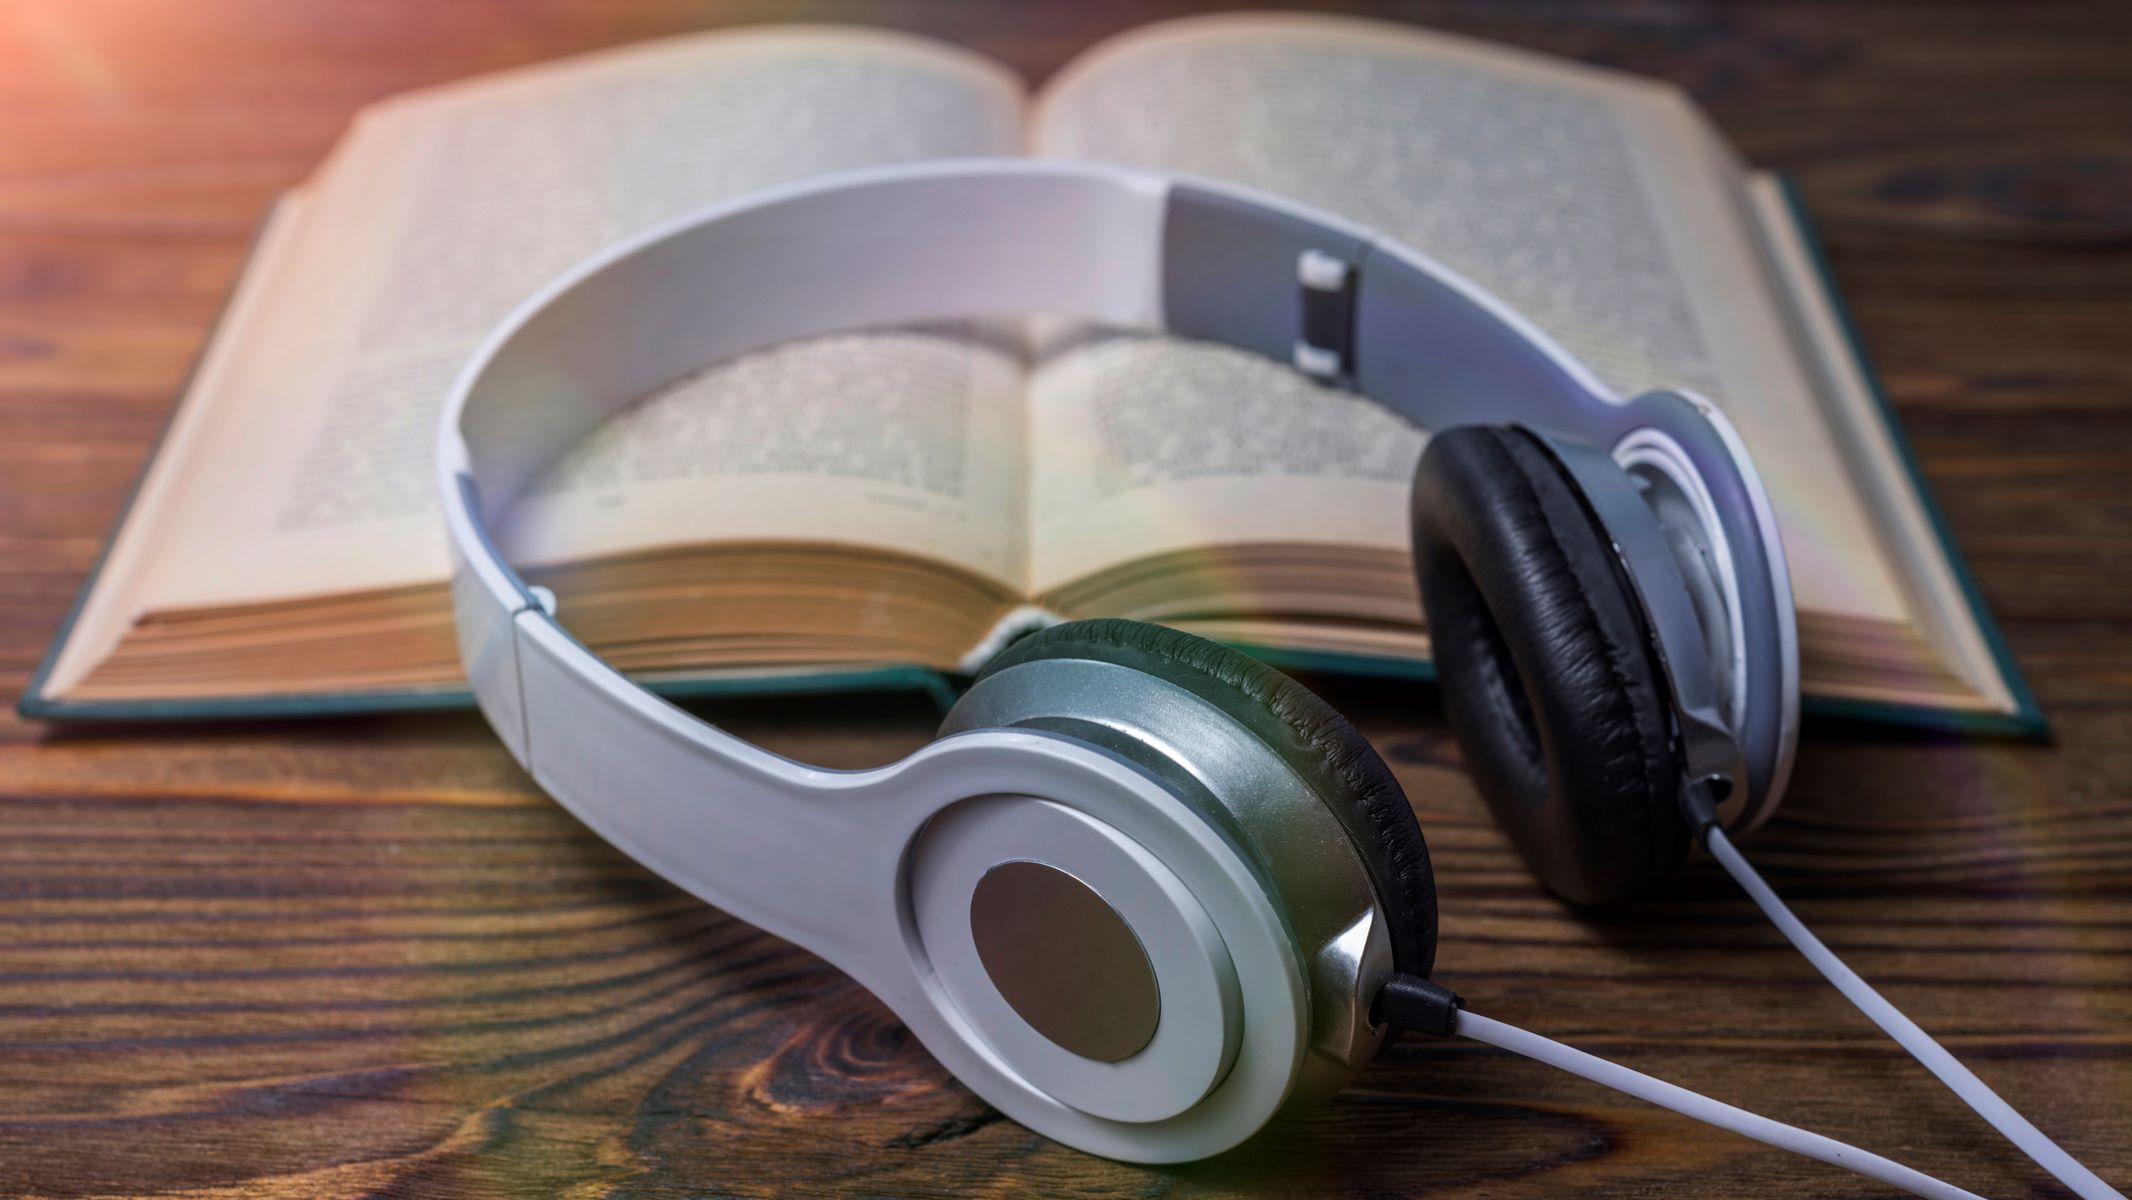 How Much Is An Audiobook Subscription